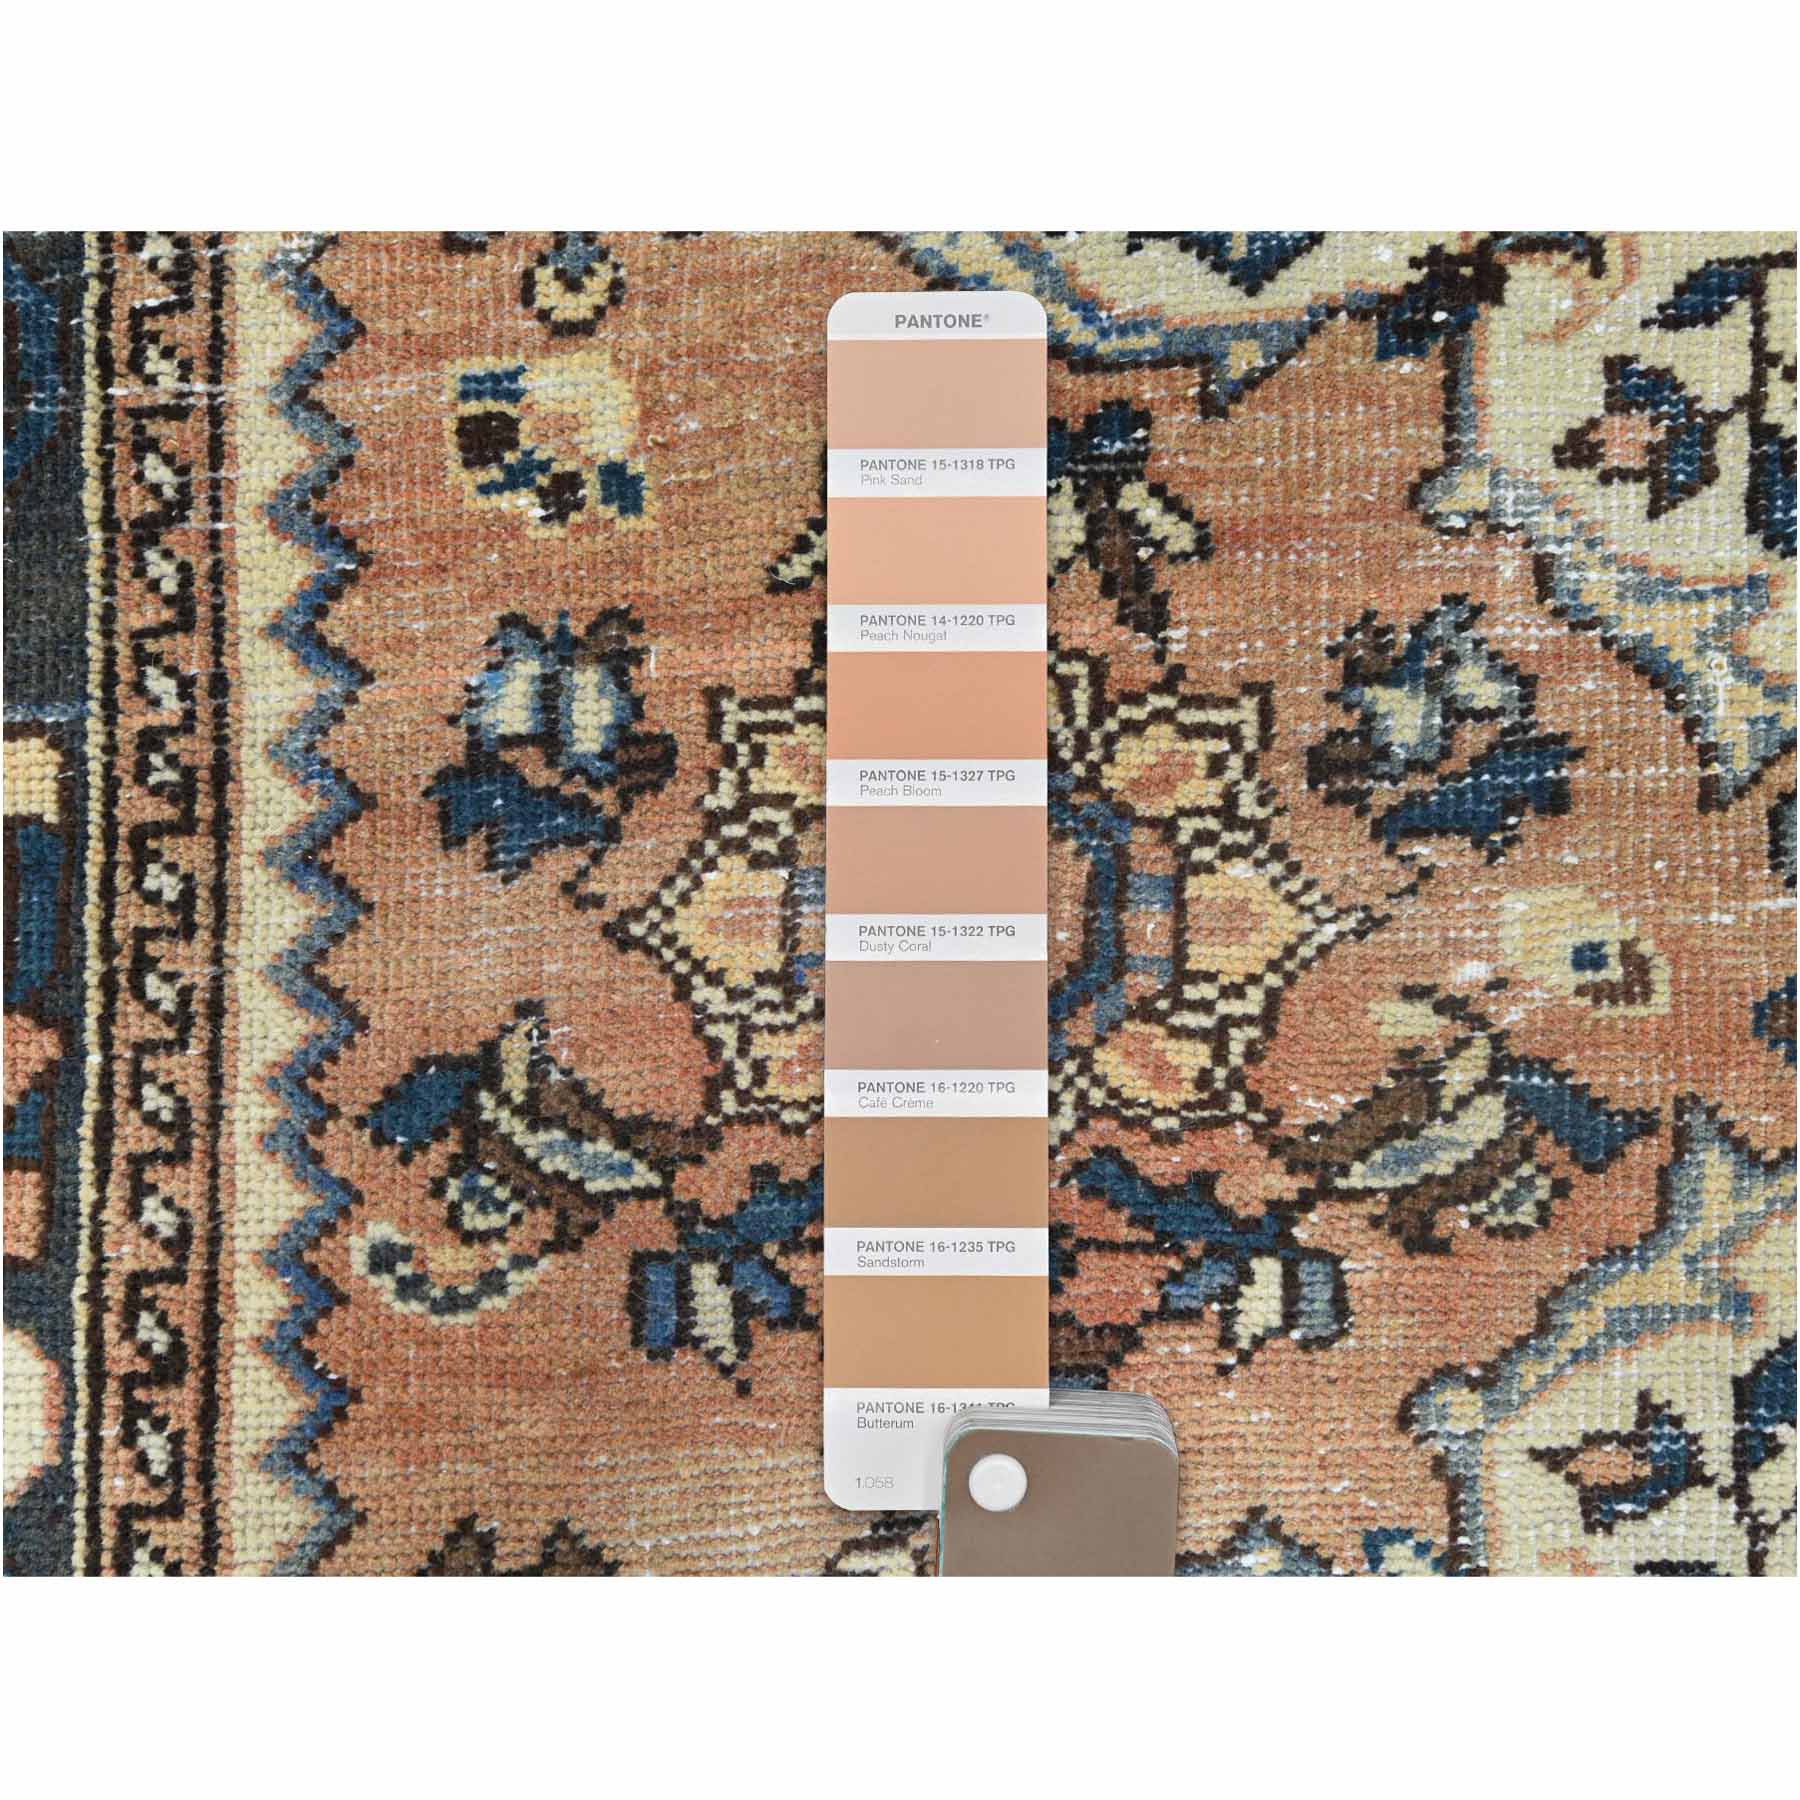 Overdyed-Vintage-Hand-Knotted-Rug-309560